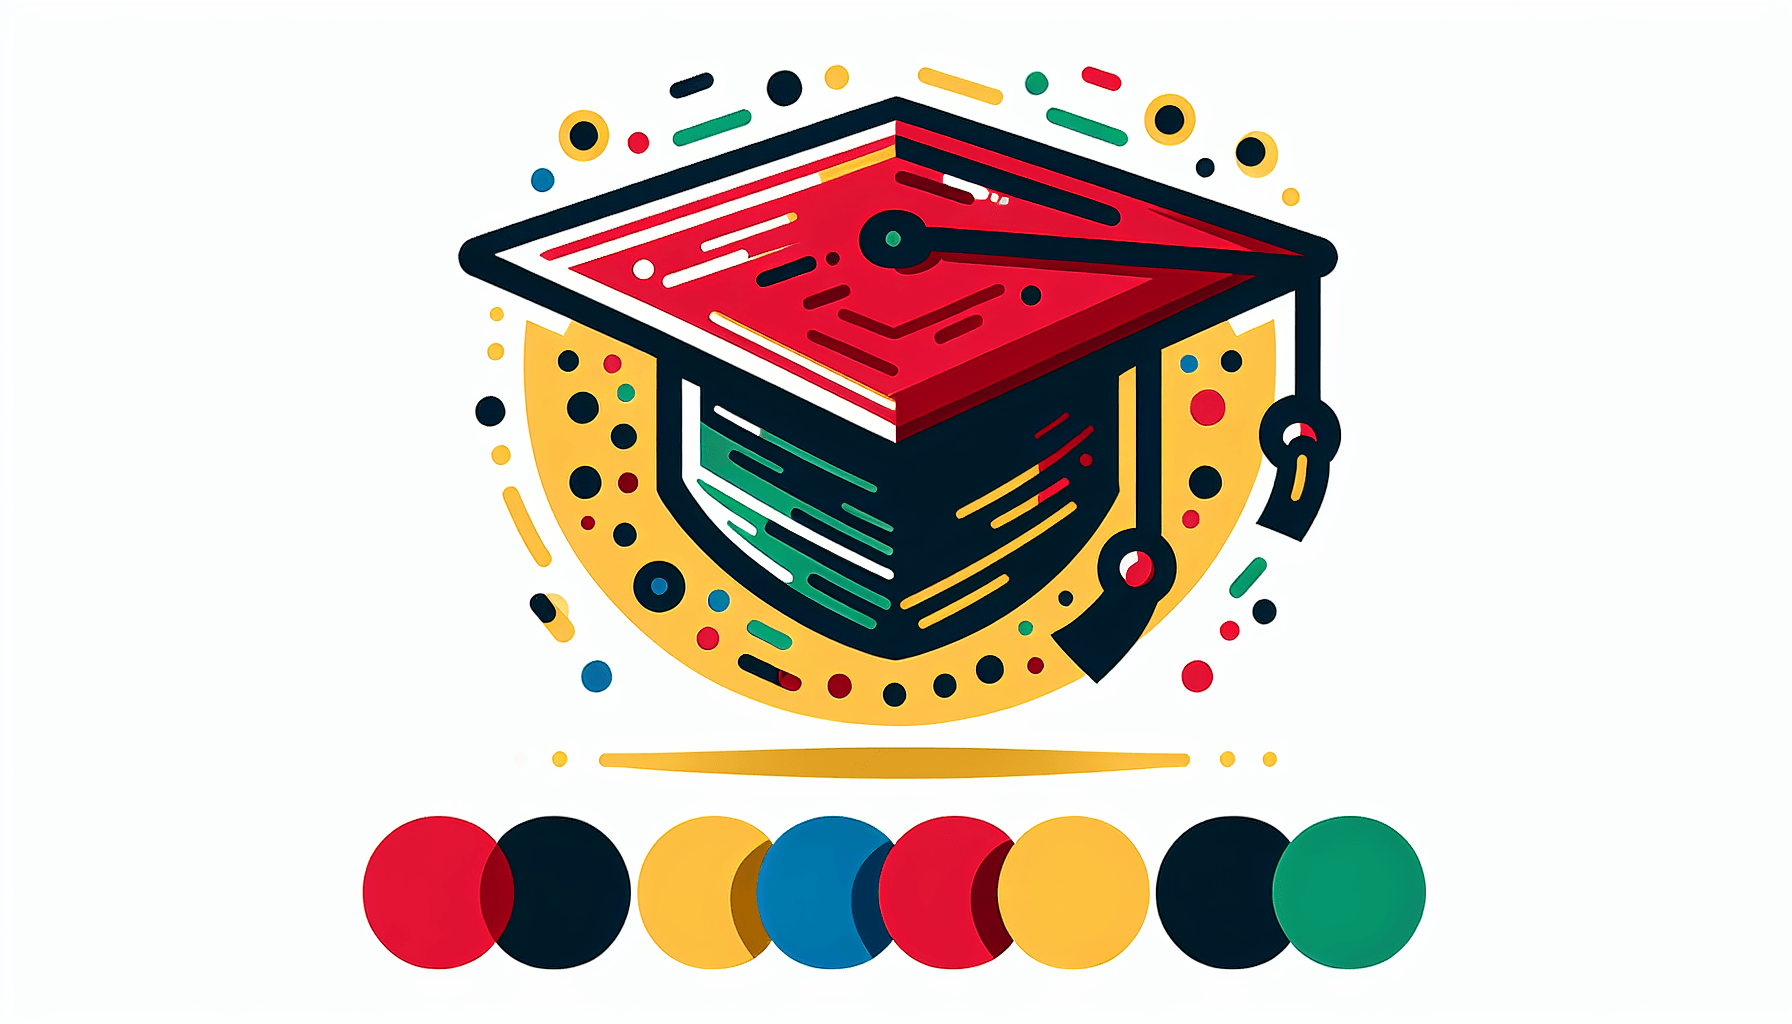 Mortarboard in flat illustration style and white background, red #f47574, green #88c7a8, yellow #fcc44b, and blue #645bc8 colors.